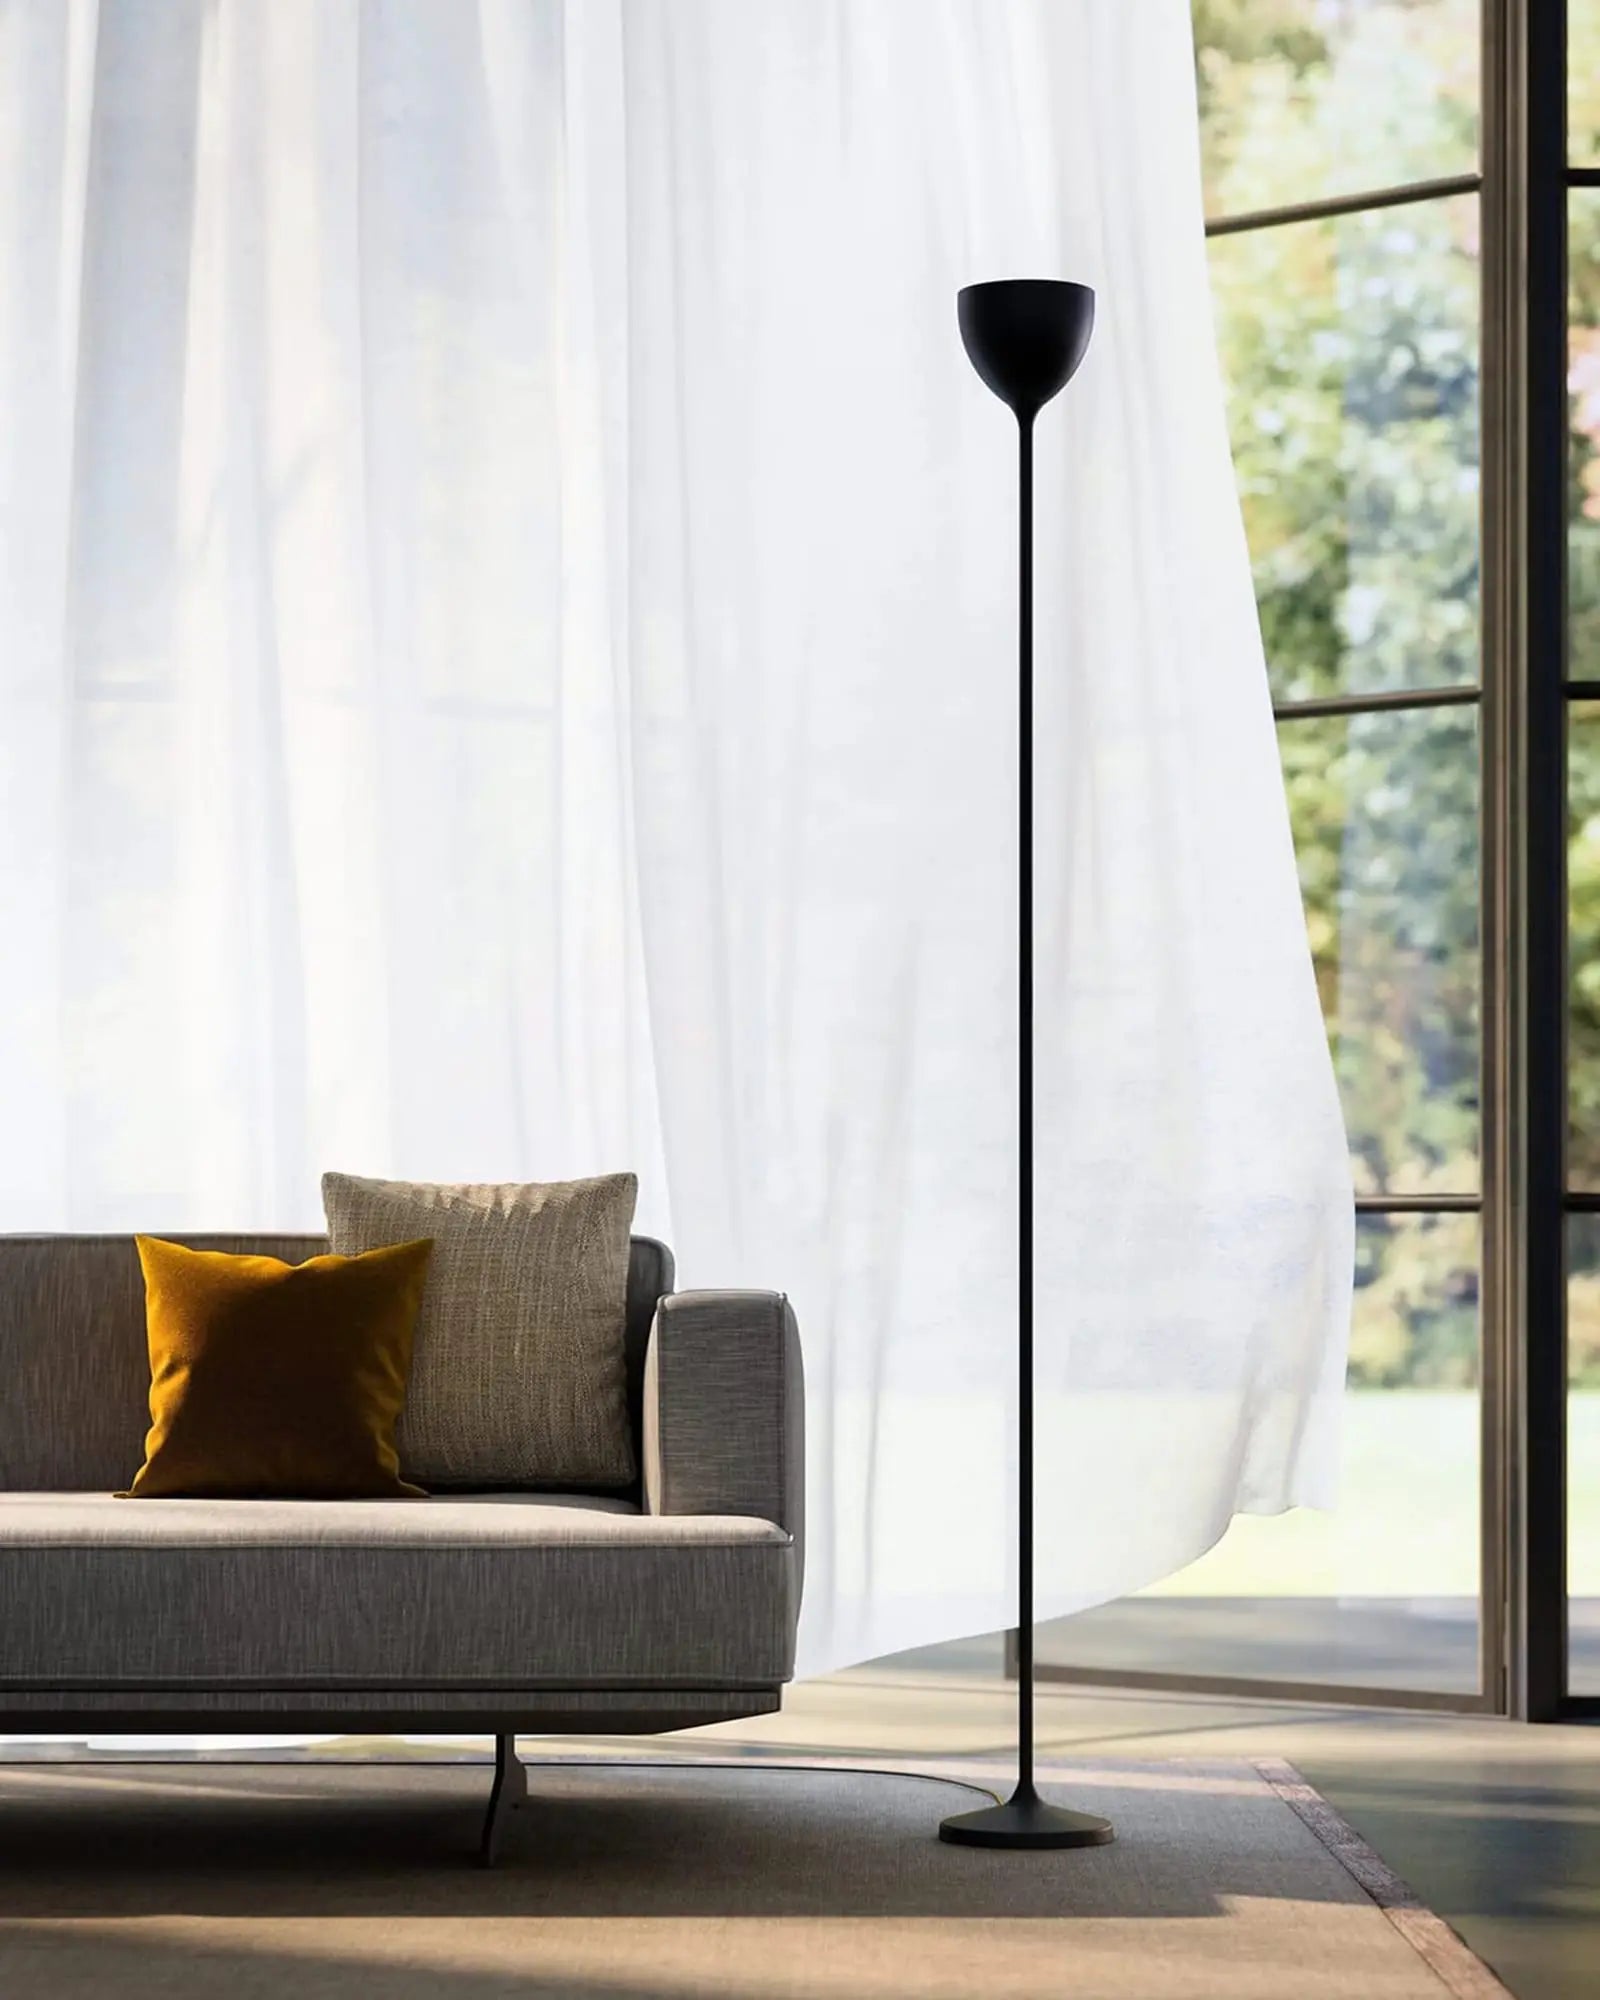 Drink contemporary floor light in a living room on the sofa side